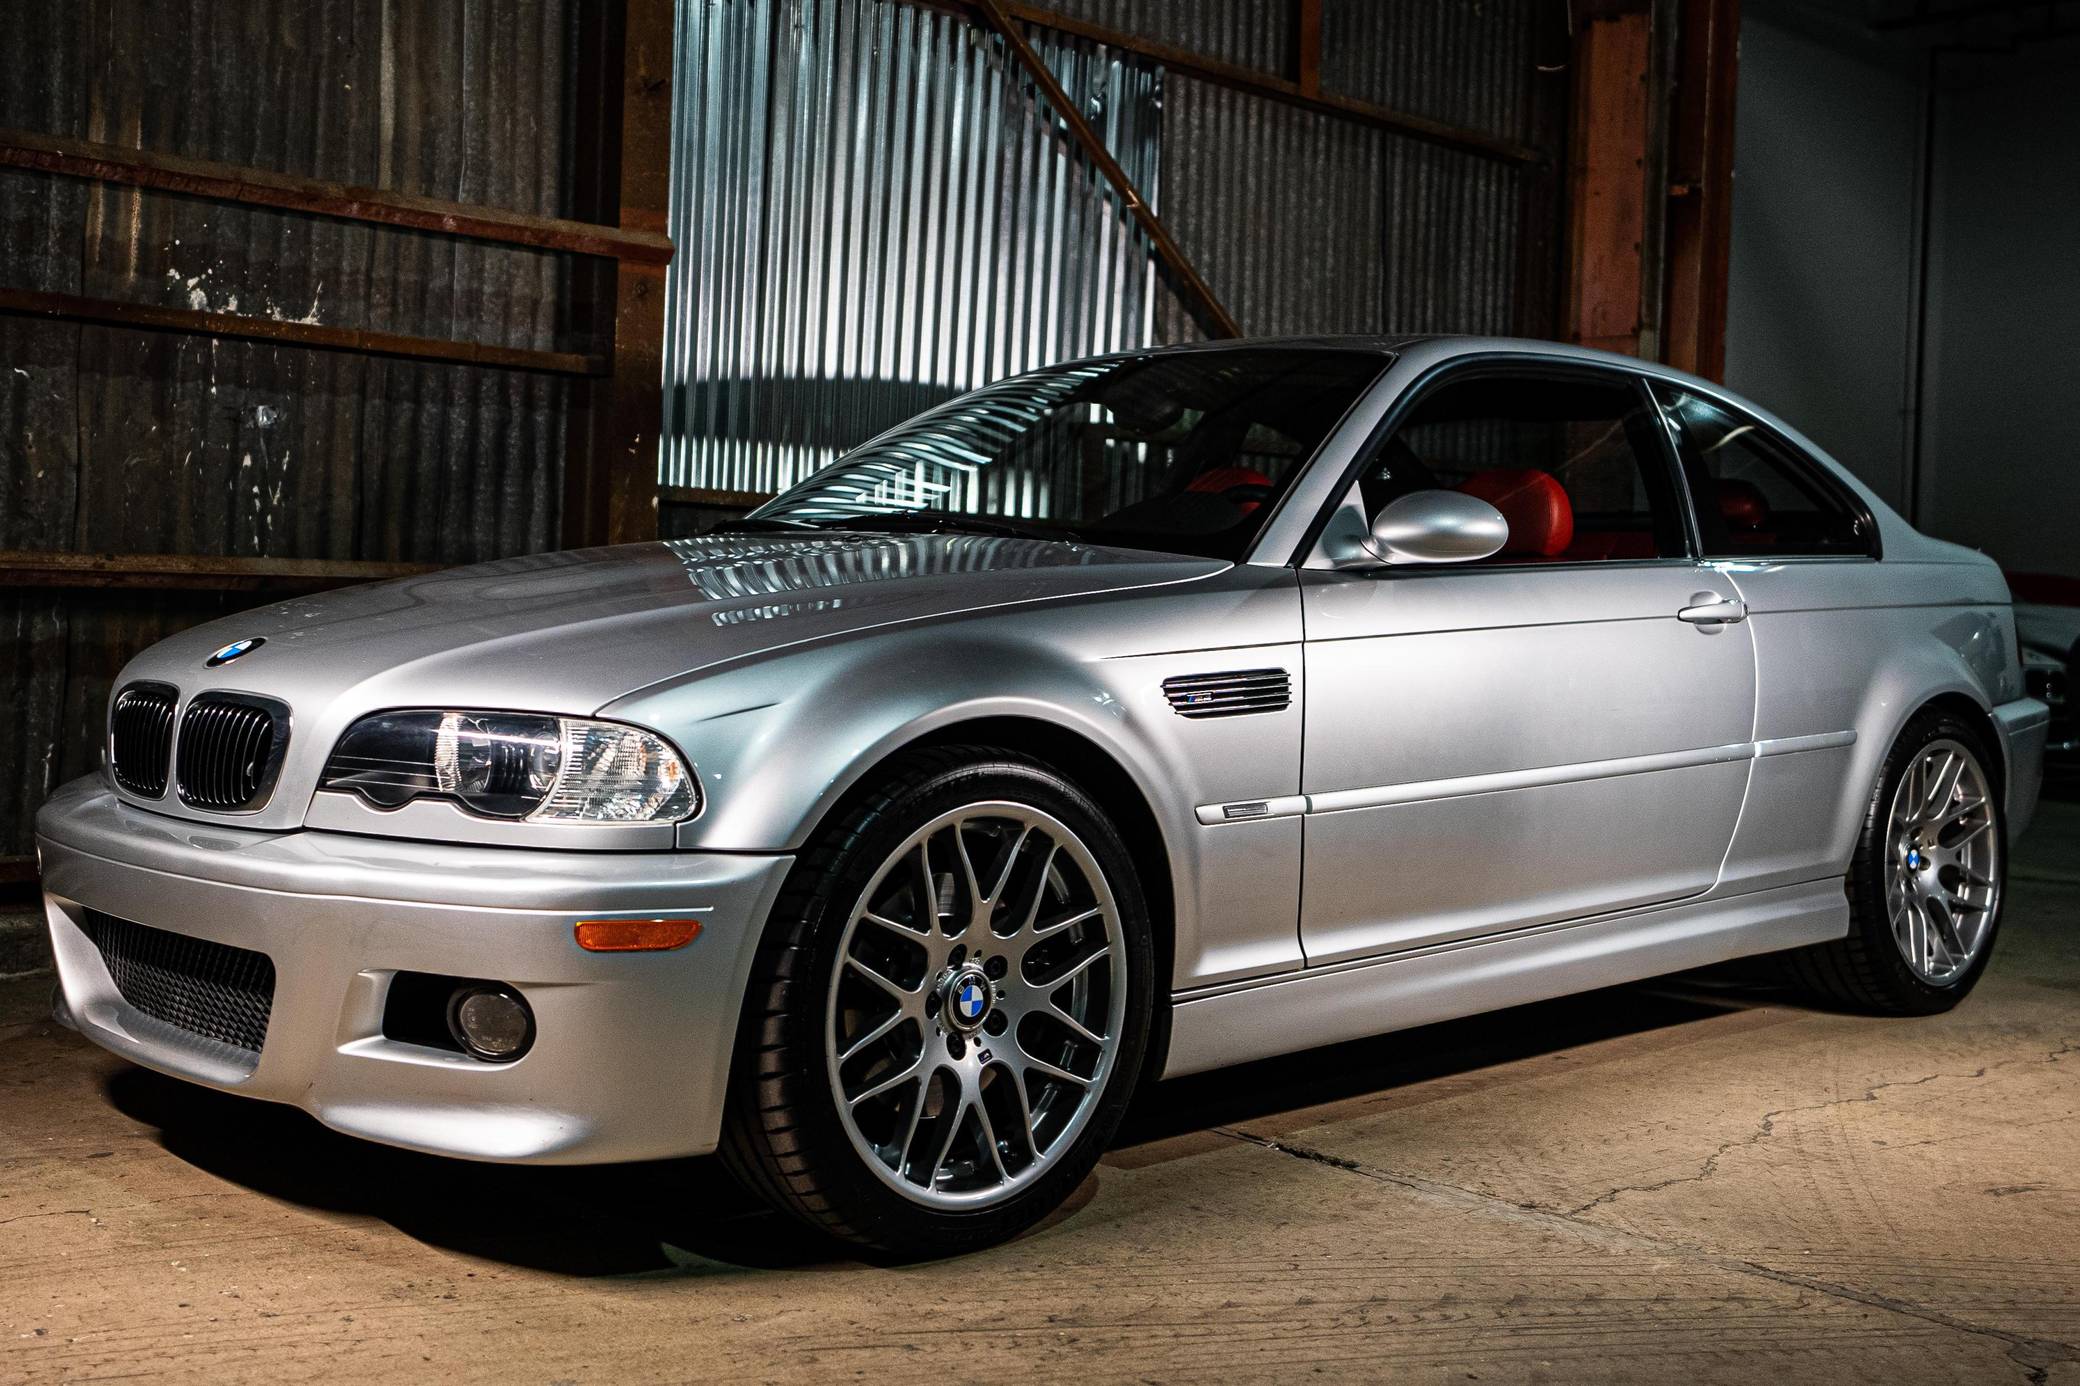 BMW M3 CSL E46 Sells For Whopping R2,3 Million at Auction